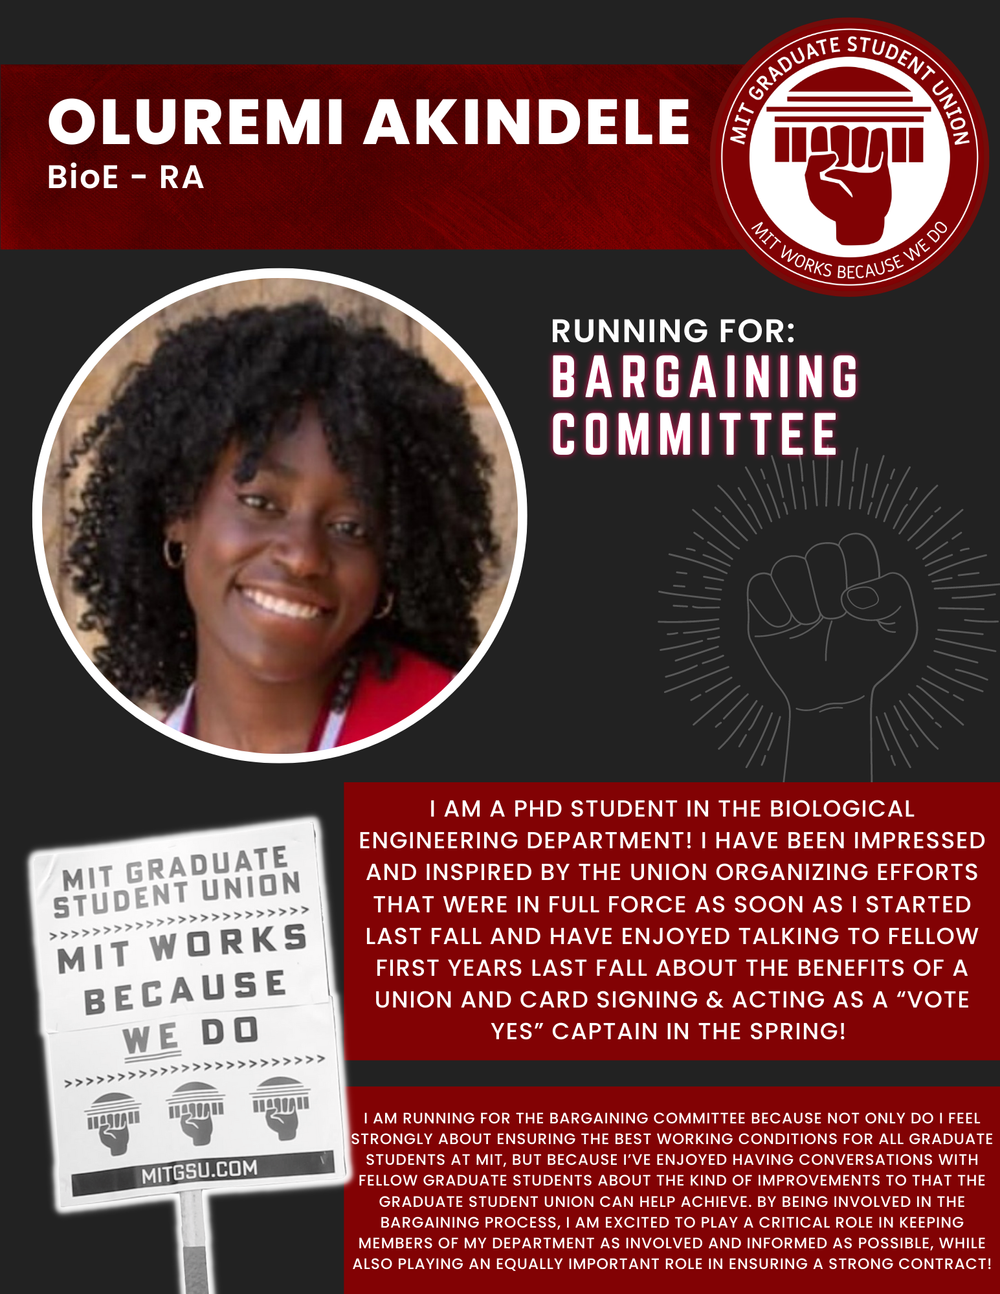  OLUREMI AKINDELE BioE - RA   RUNNING FOR: Bargaining Committee  I AM A PHD STUDENT IN THE BIOLOGICAL ENGINEERING DEPARTMENT! I HAVE BEEN IMPRESSED AND INSPIRED BY THE UNION ORGANIZING EFFORTS THAT WERE IN FULL FORCE AS SOON AS I STARTED LAST FALL AN